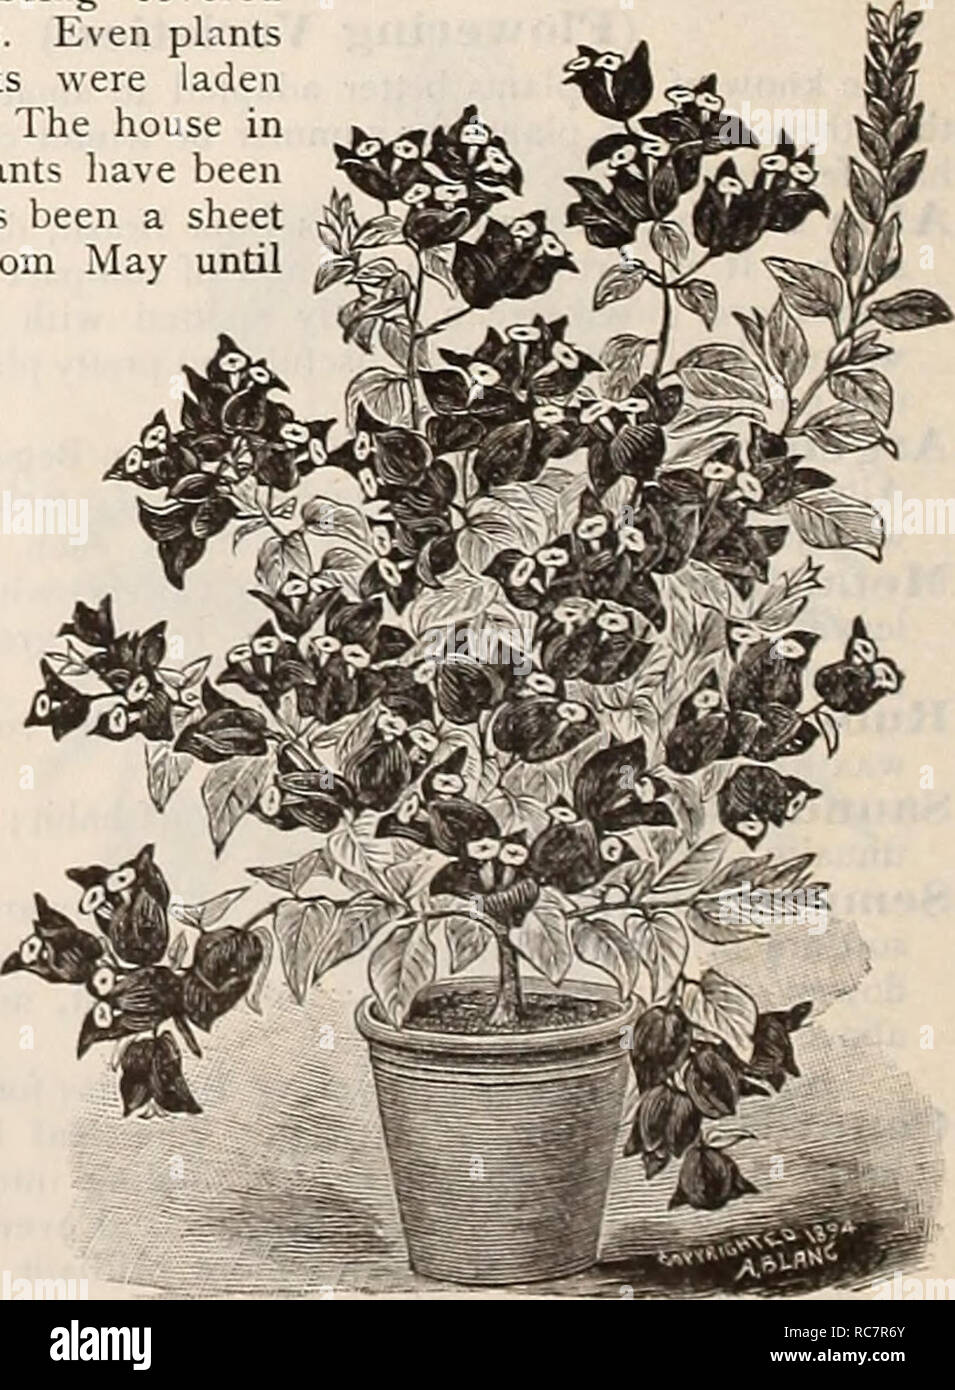 . Dreer's garden calendar : 1896. Seeds Catalogs; Nursery stock Catalogs; Gardening Equipment and supplies Catalogs; Flowers Seeds Catalogs; Vegetables Seeds Catalogs; Fruit Seeds Catalogs. Bouvardia, Alfred Nkunbr. BOUYARDIAS. Shrubby plants, with corymbs of white, rose, crimson and scarlet flowers, blooming during the autumn and winter. Alfred Neuner. Purest waxy-white. (See cut.) Davidsoni. The be--t of the single white varieties. Hlllllboldti Corymbiflora. Pure white, fragrant. President Cleveland. Dazzling scarlet flowers. Rosea Multiflora. Beautiful shade of salmon rose. 15 cts. each, se Stock Photo